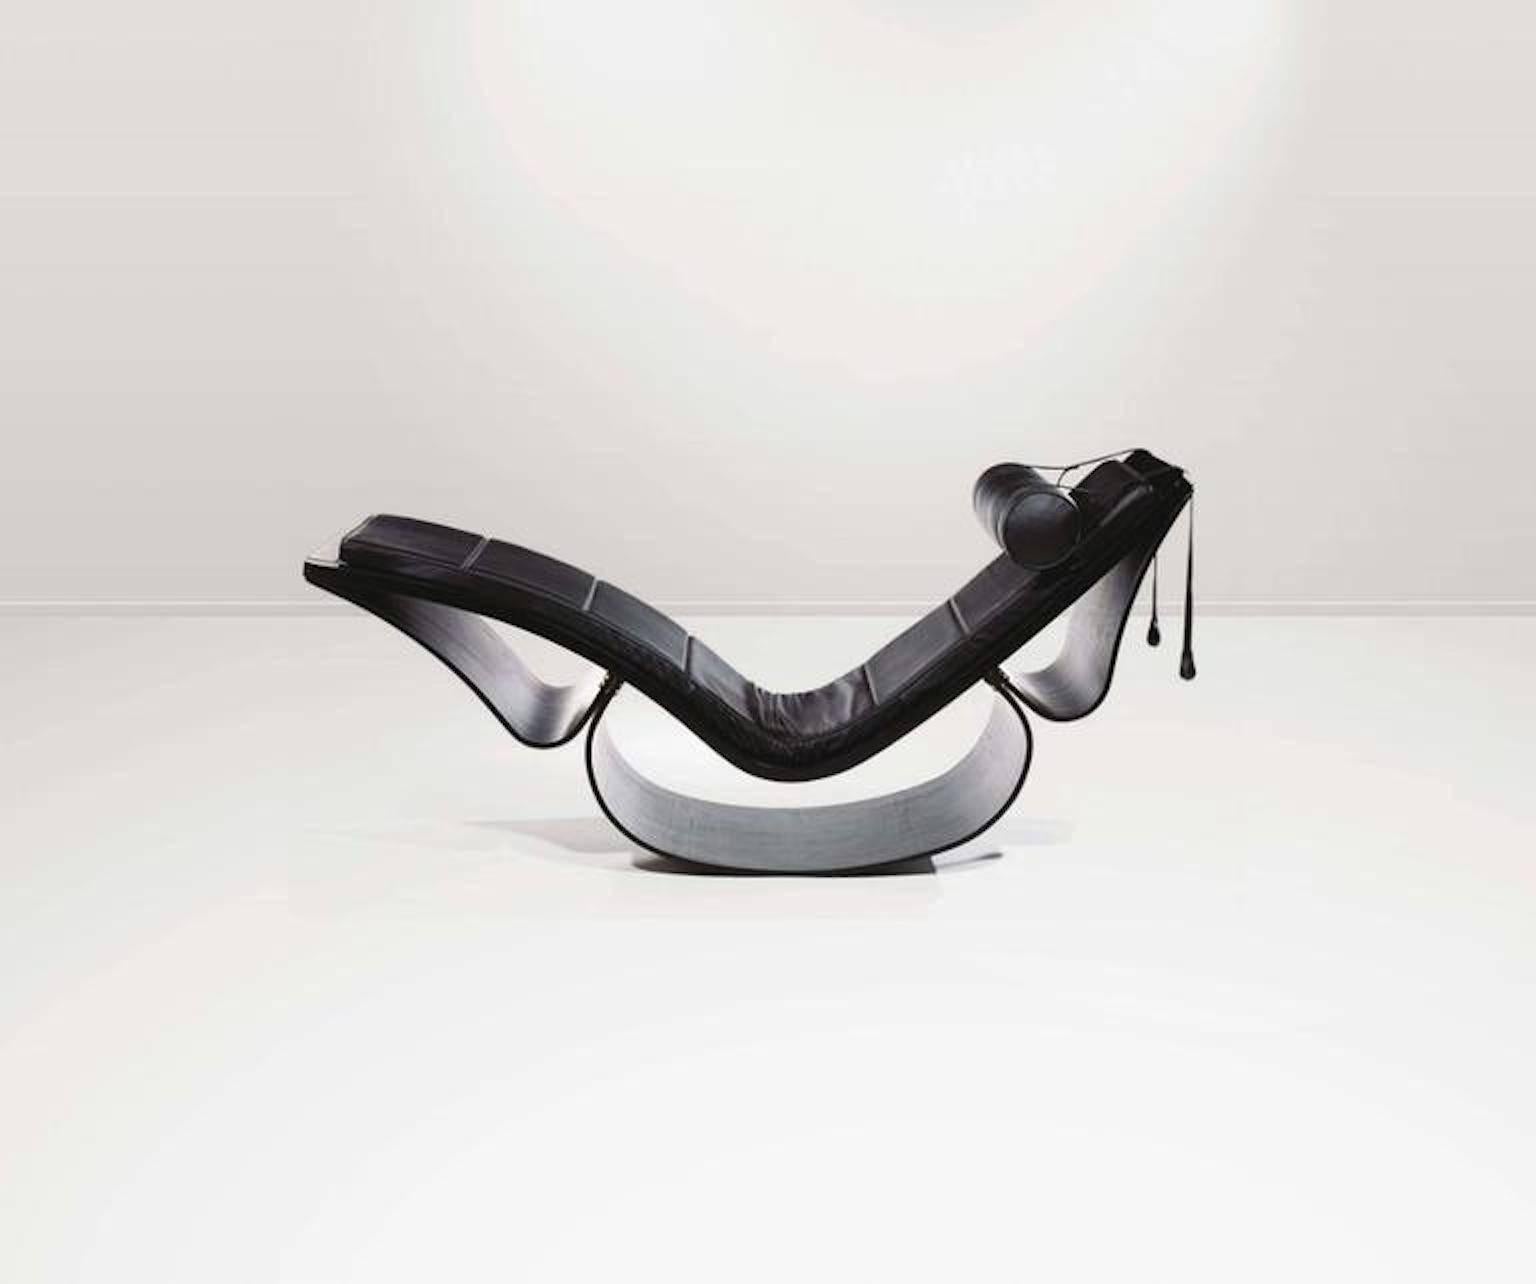 A sculptural rocking Rio chaise lounge, designed in 1978, contemporary edition. Base composed of three elements including supple ribbons of molded darkened ash laminate, cushions maintained by straps on the seat and backrest, mobile headrest, black